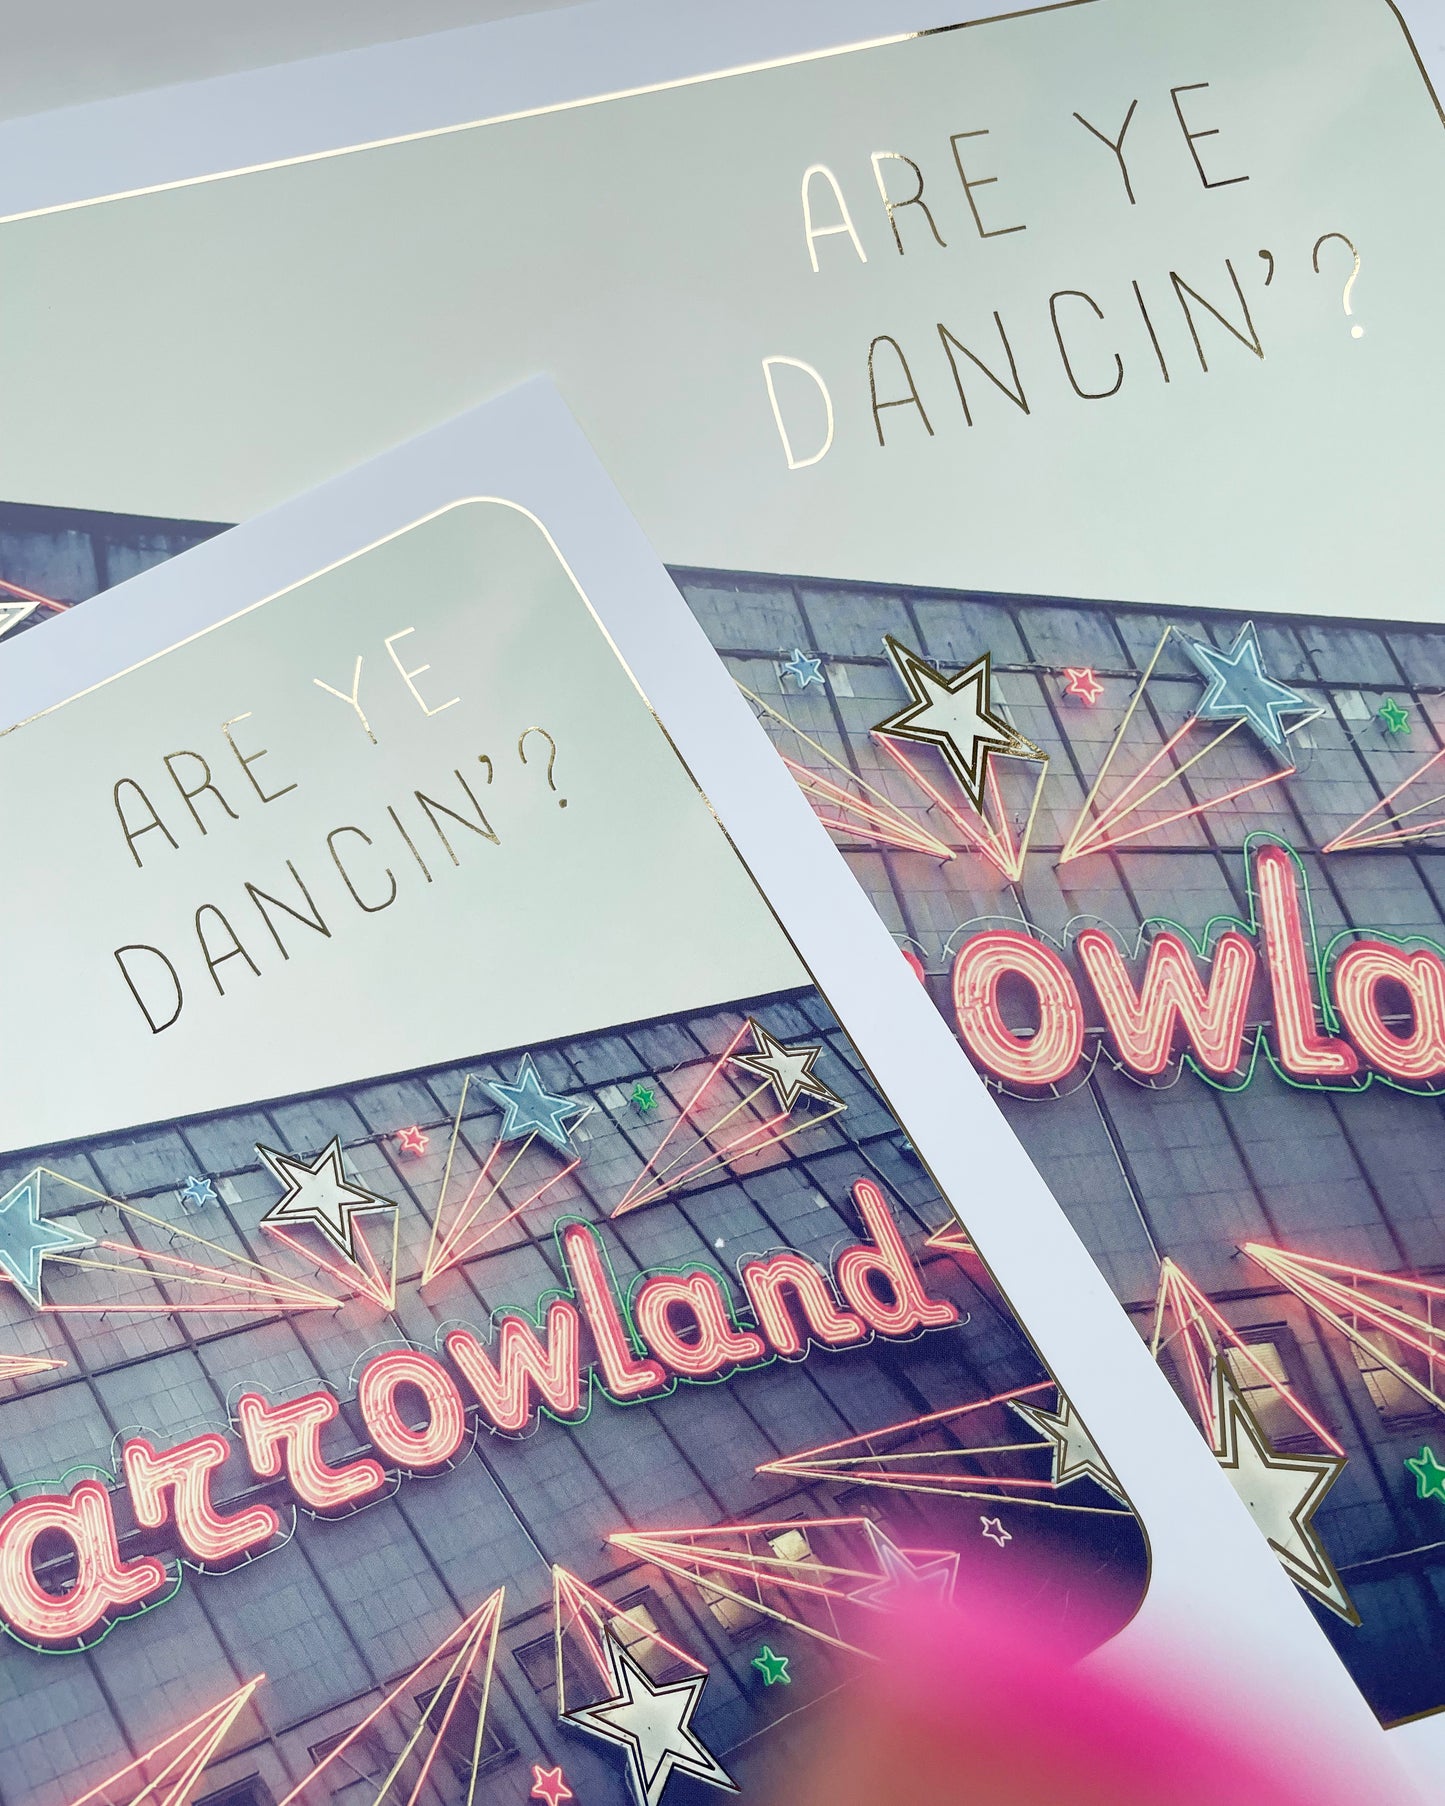 Special Edition Scottish Banter Print Barrowland Ballroom with Gold Foil